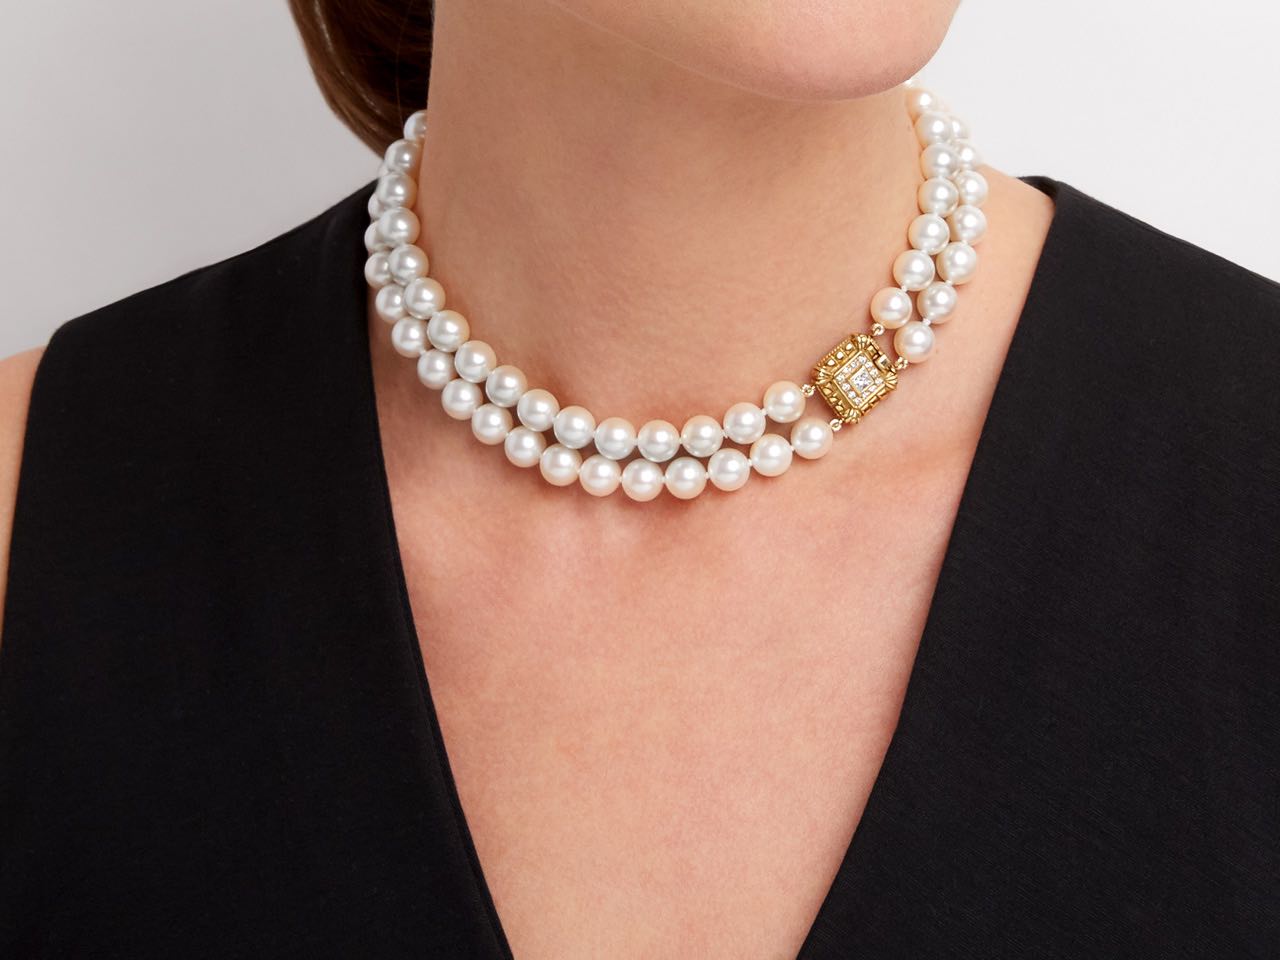 Double-strand textured faux pearl necklace - Women's fashion | Stradivarius  United States